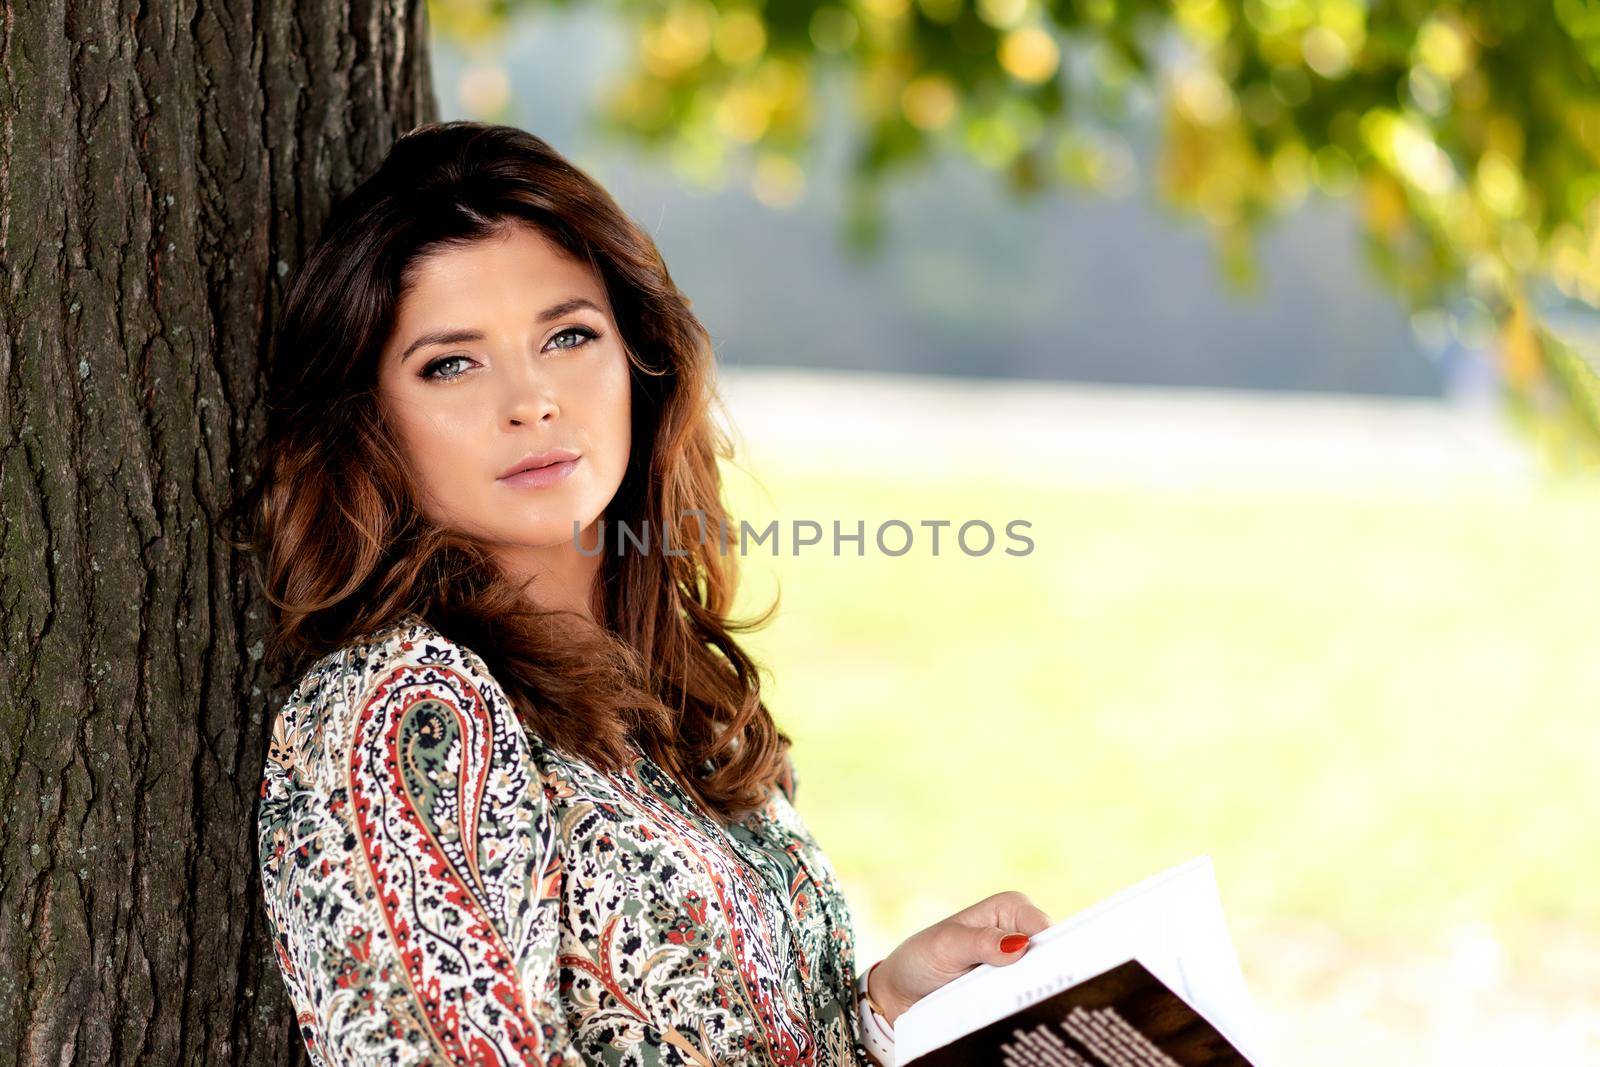 Portrait of a sensual and lovely woman with nice hairstyle reading book outdoor on a sunny day under the tree ( copy space)